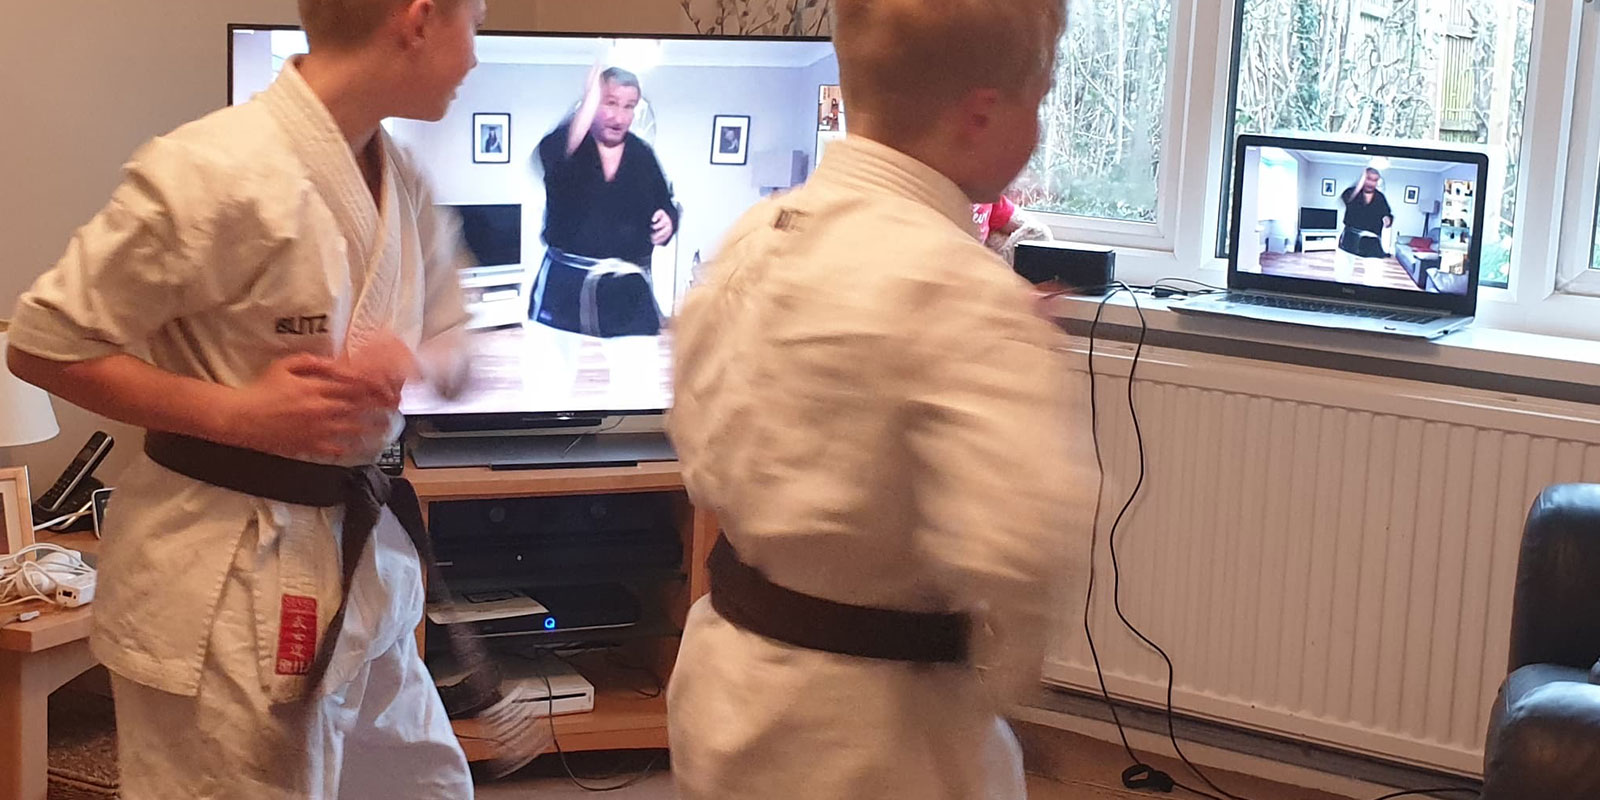 Live streamed karate classes. Take lessons in your home